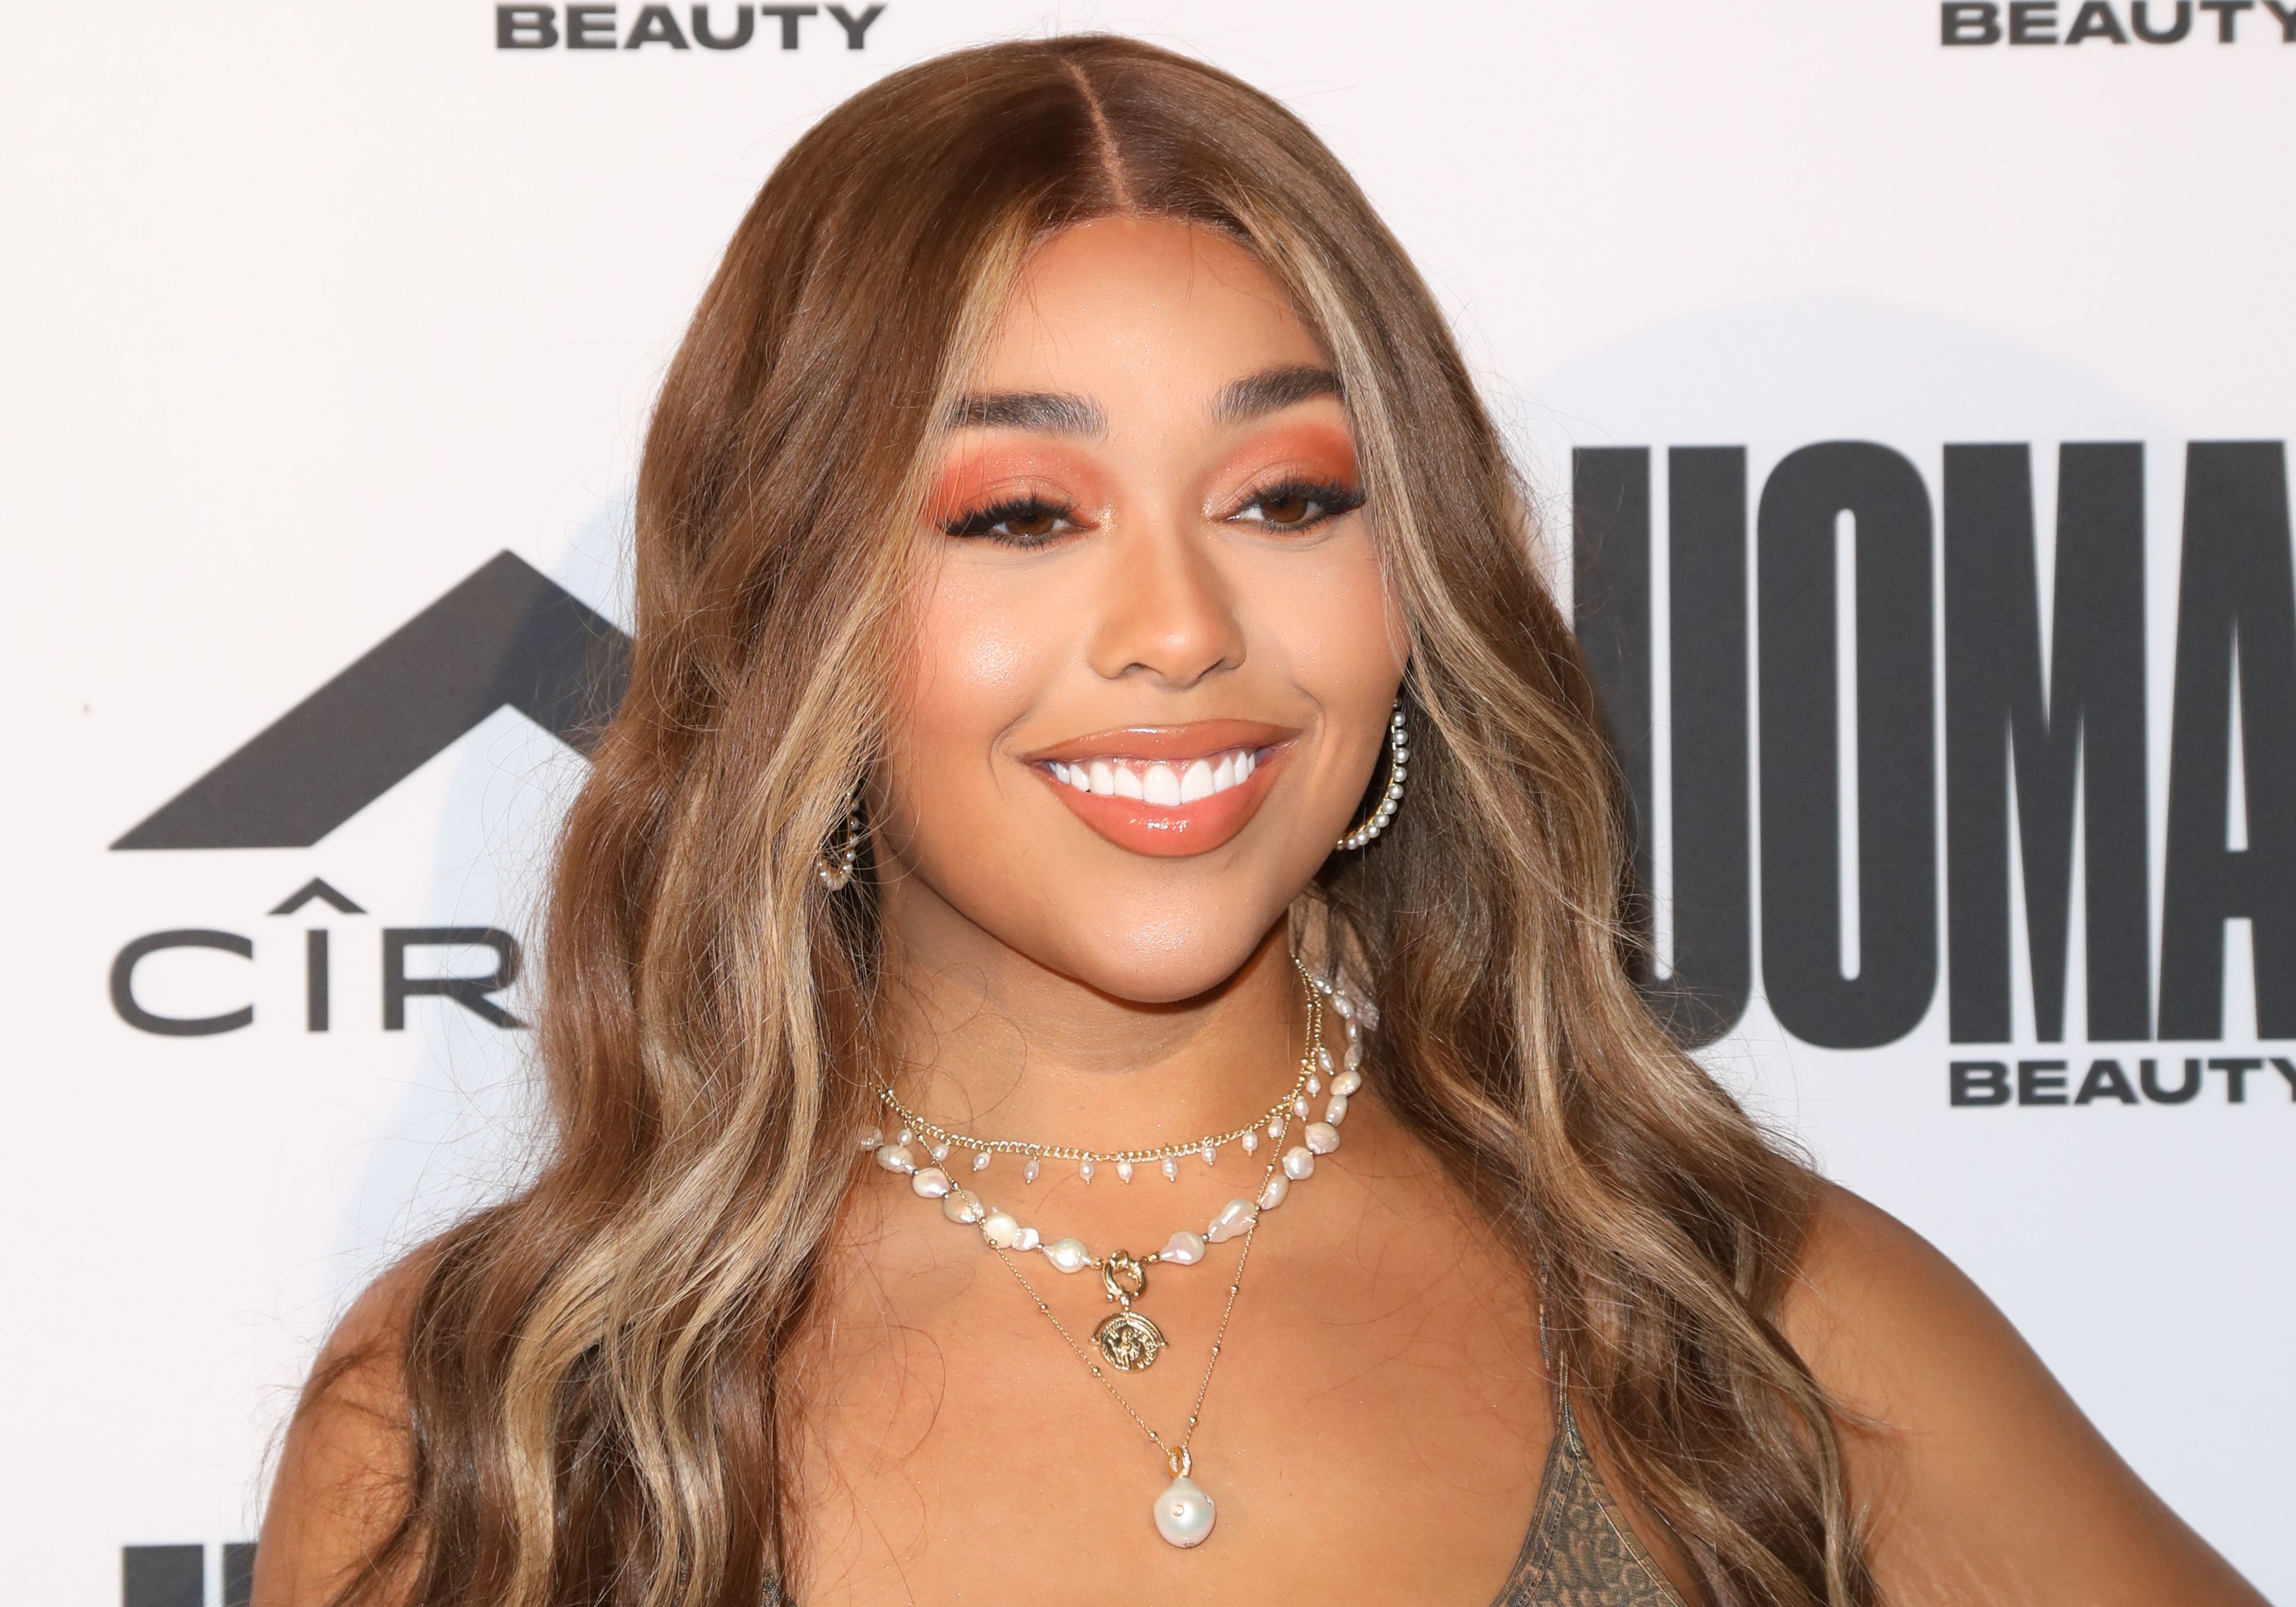 Social media personality Jordyn Woods at the UOMA Summer House LA at a private residence on August 10, 2019 | Photo: Getty Images